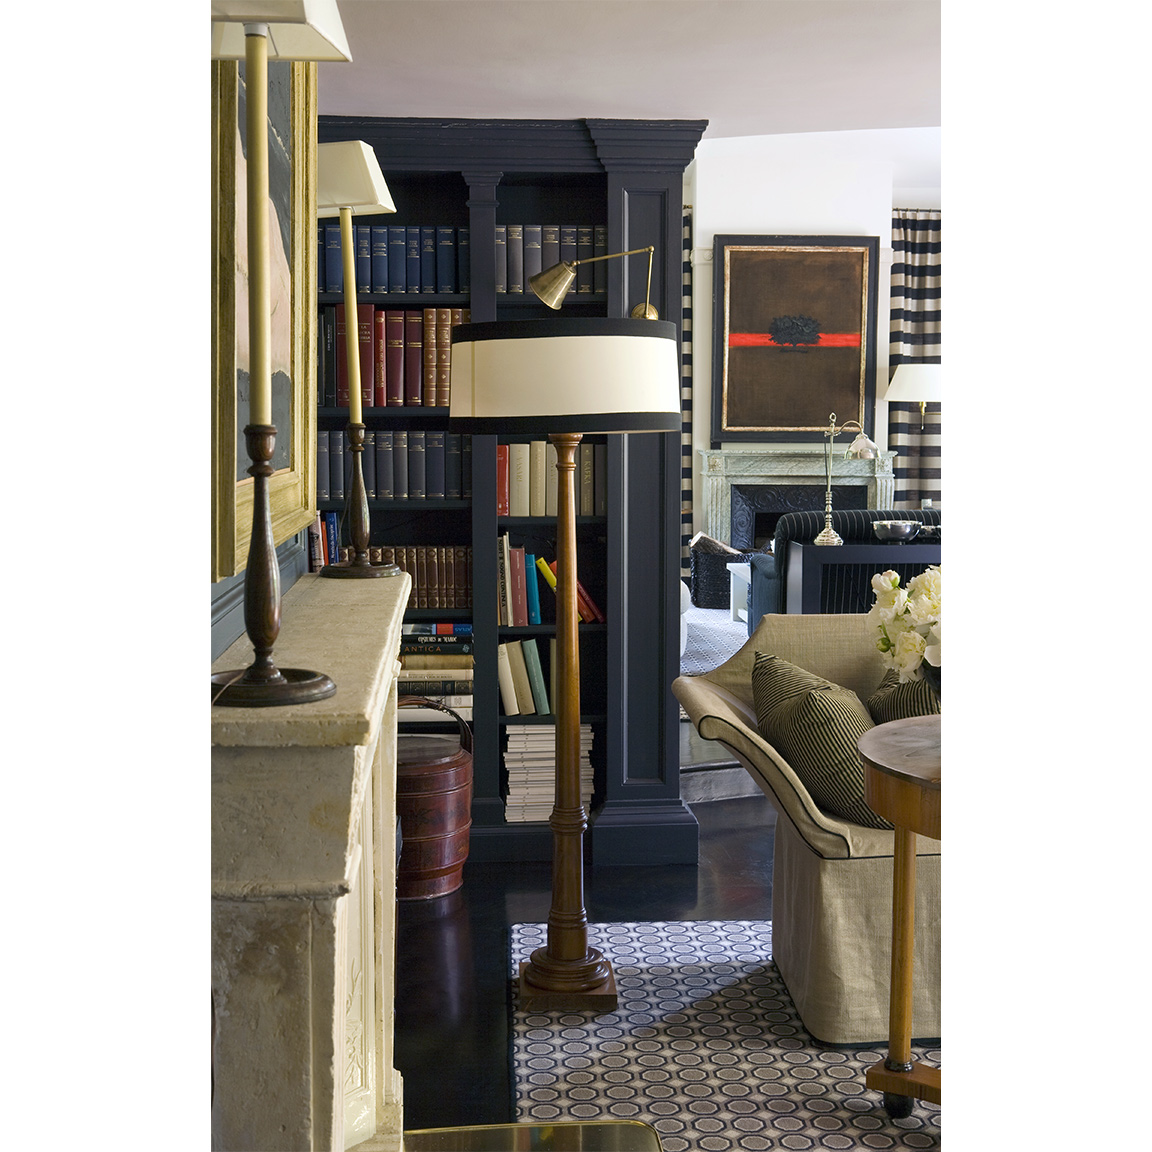 floor lamp with black and white striped lampshade and wooden body